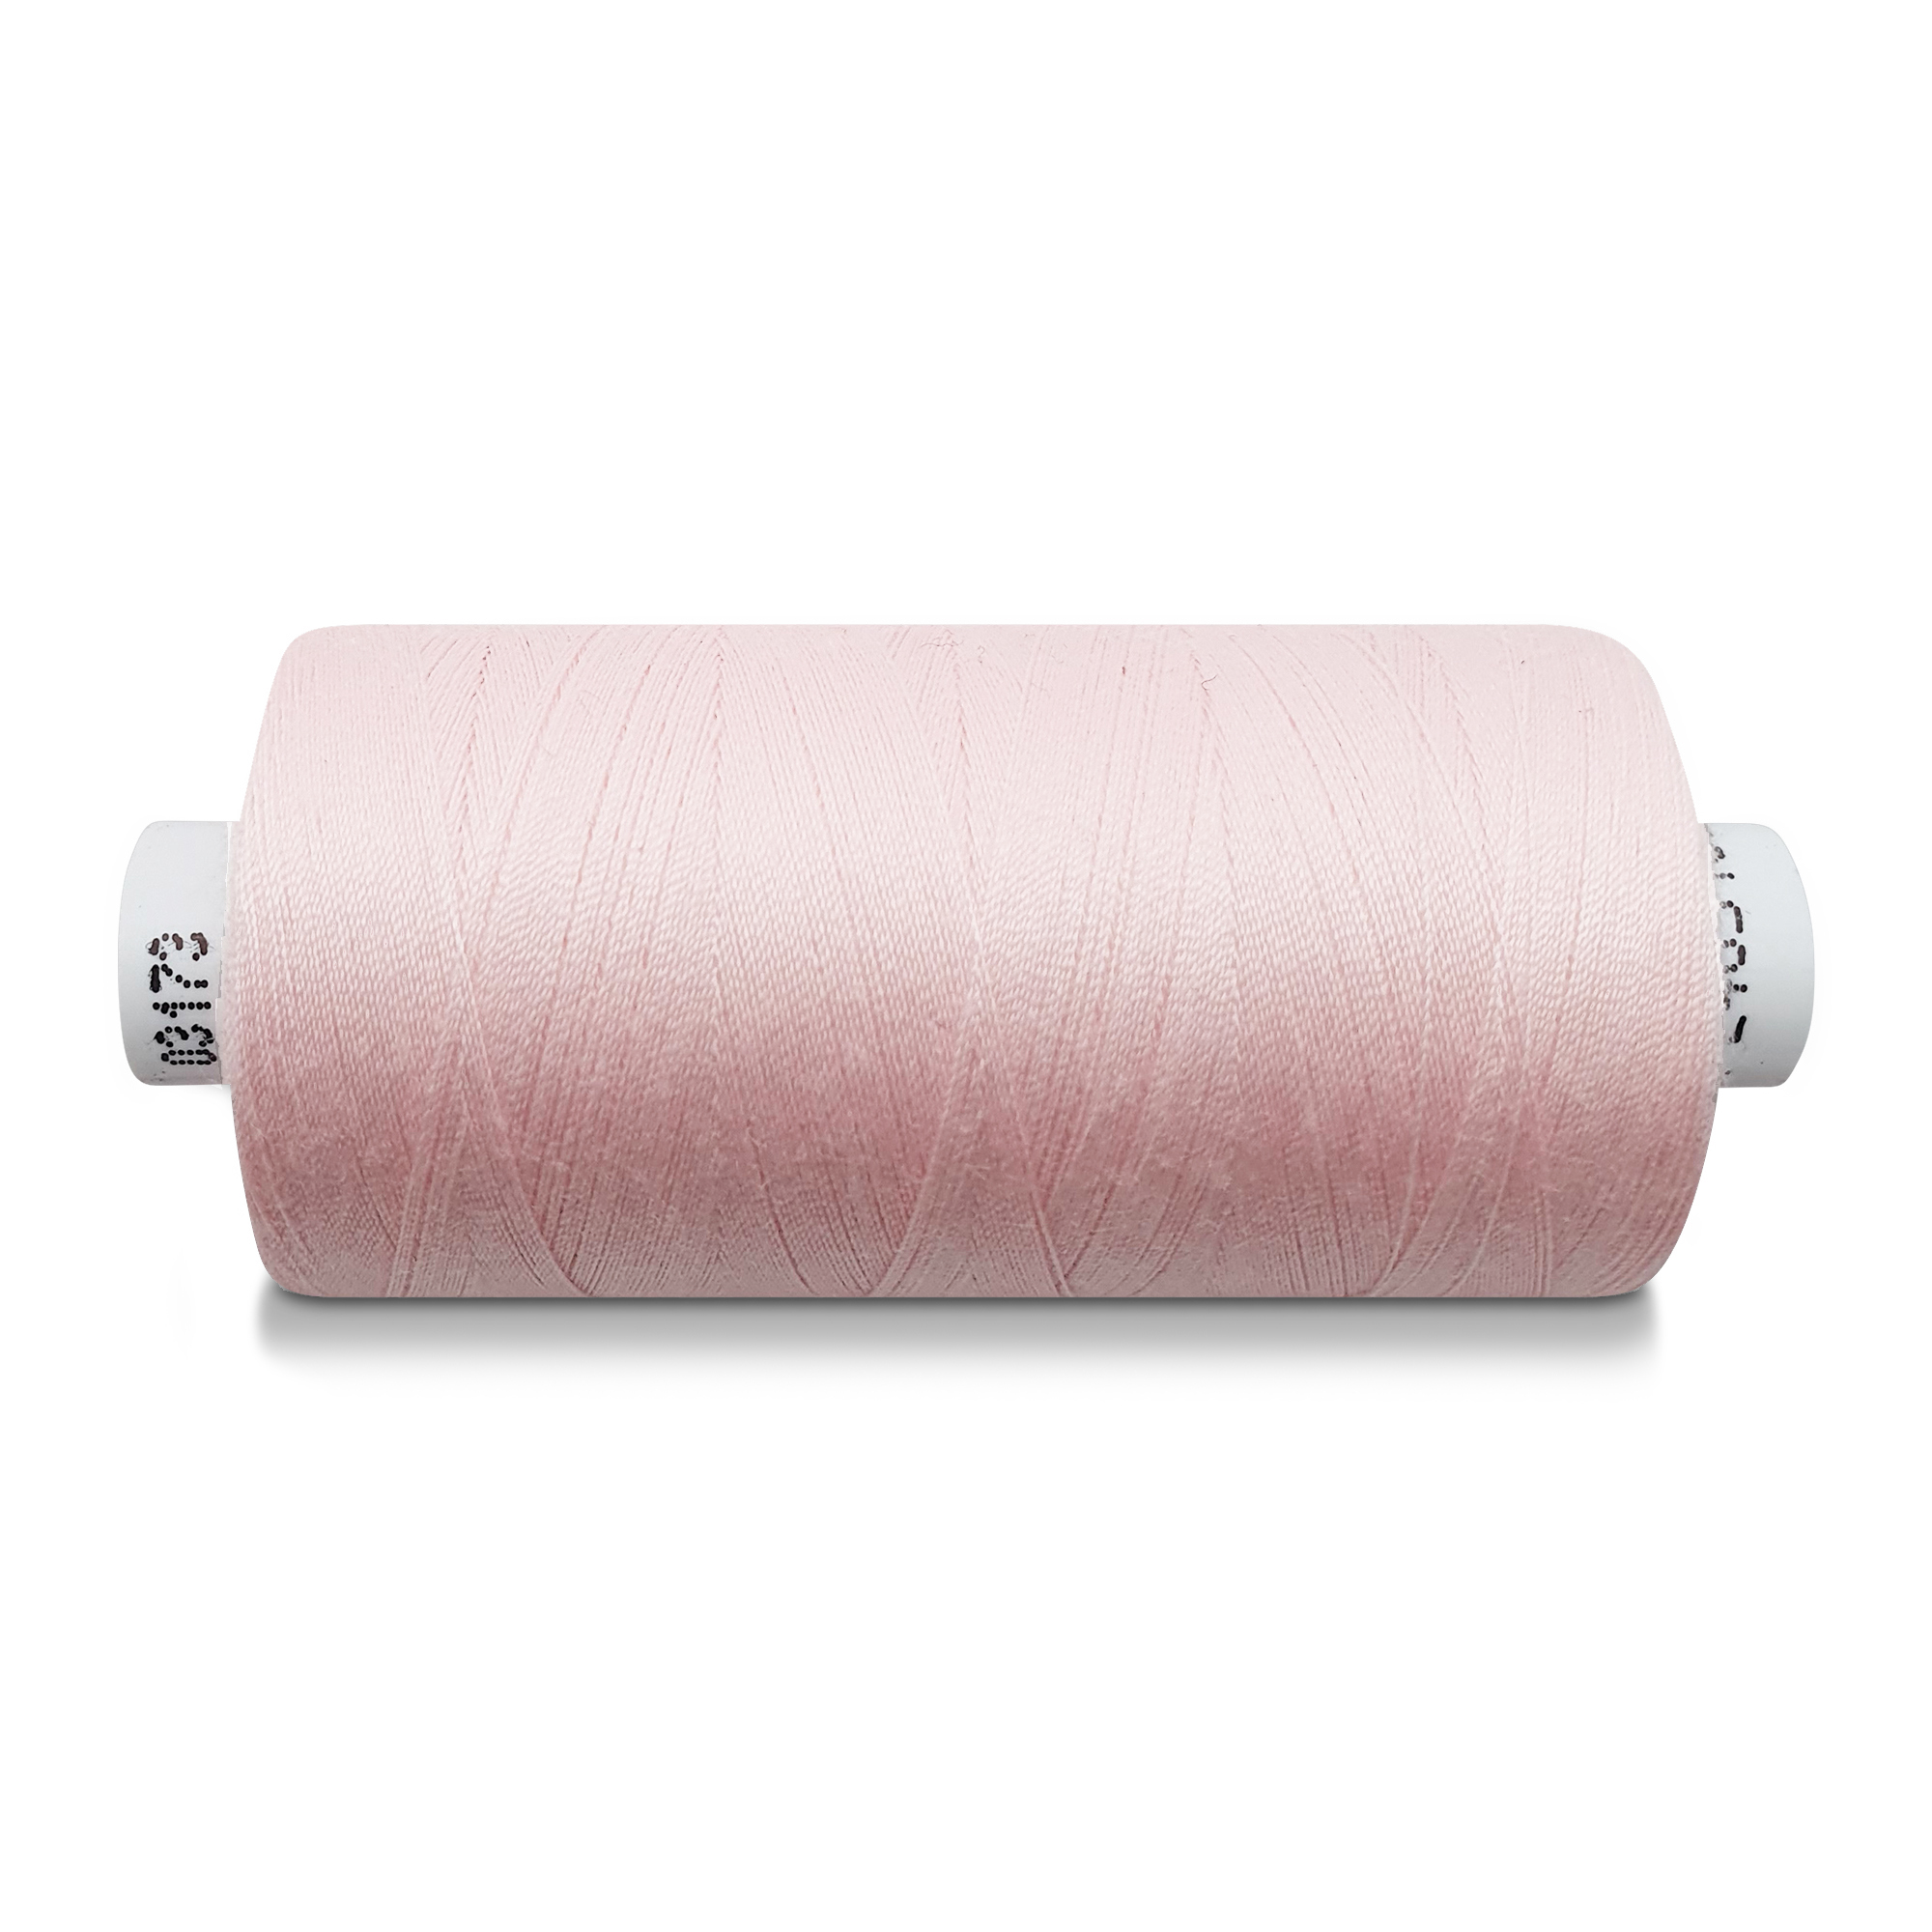 Leather/Sewing thread cherry blossom